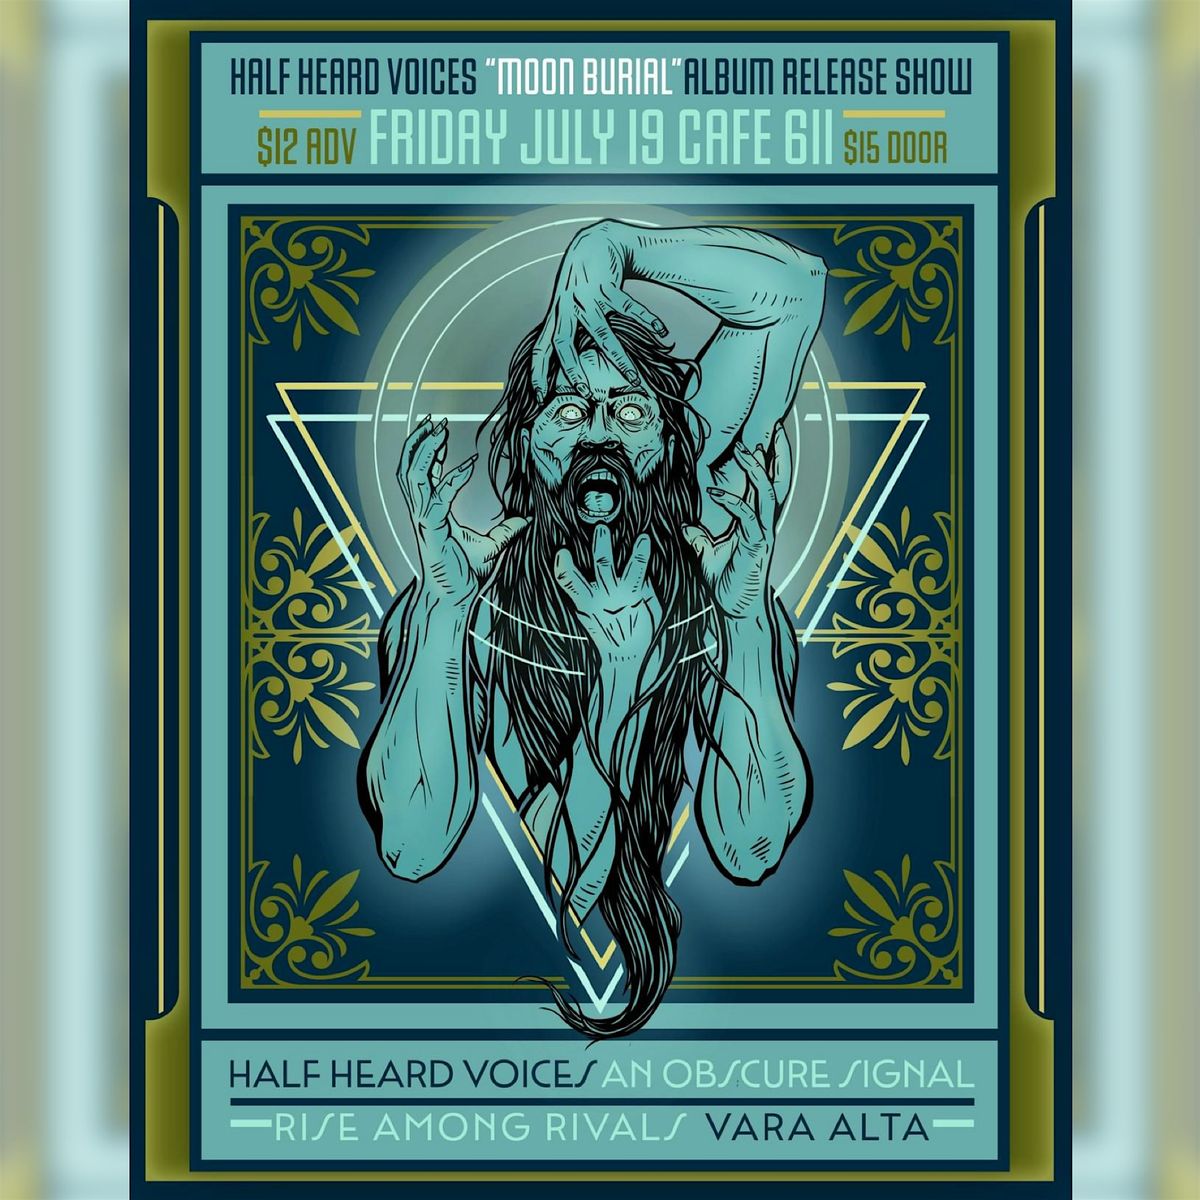 Half Heard Voices with An Obscure Signal, Rise Among Rivals, and VARA ALTA